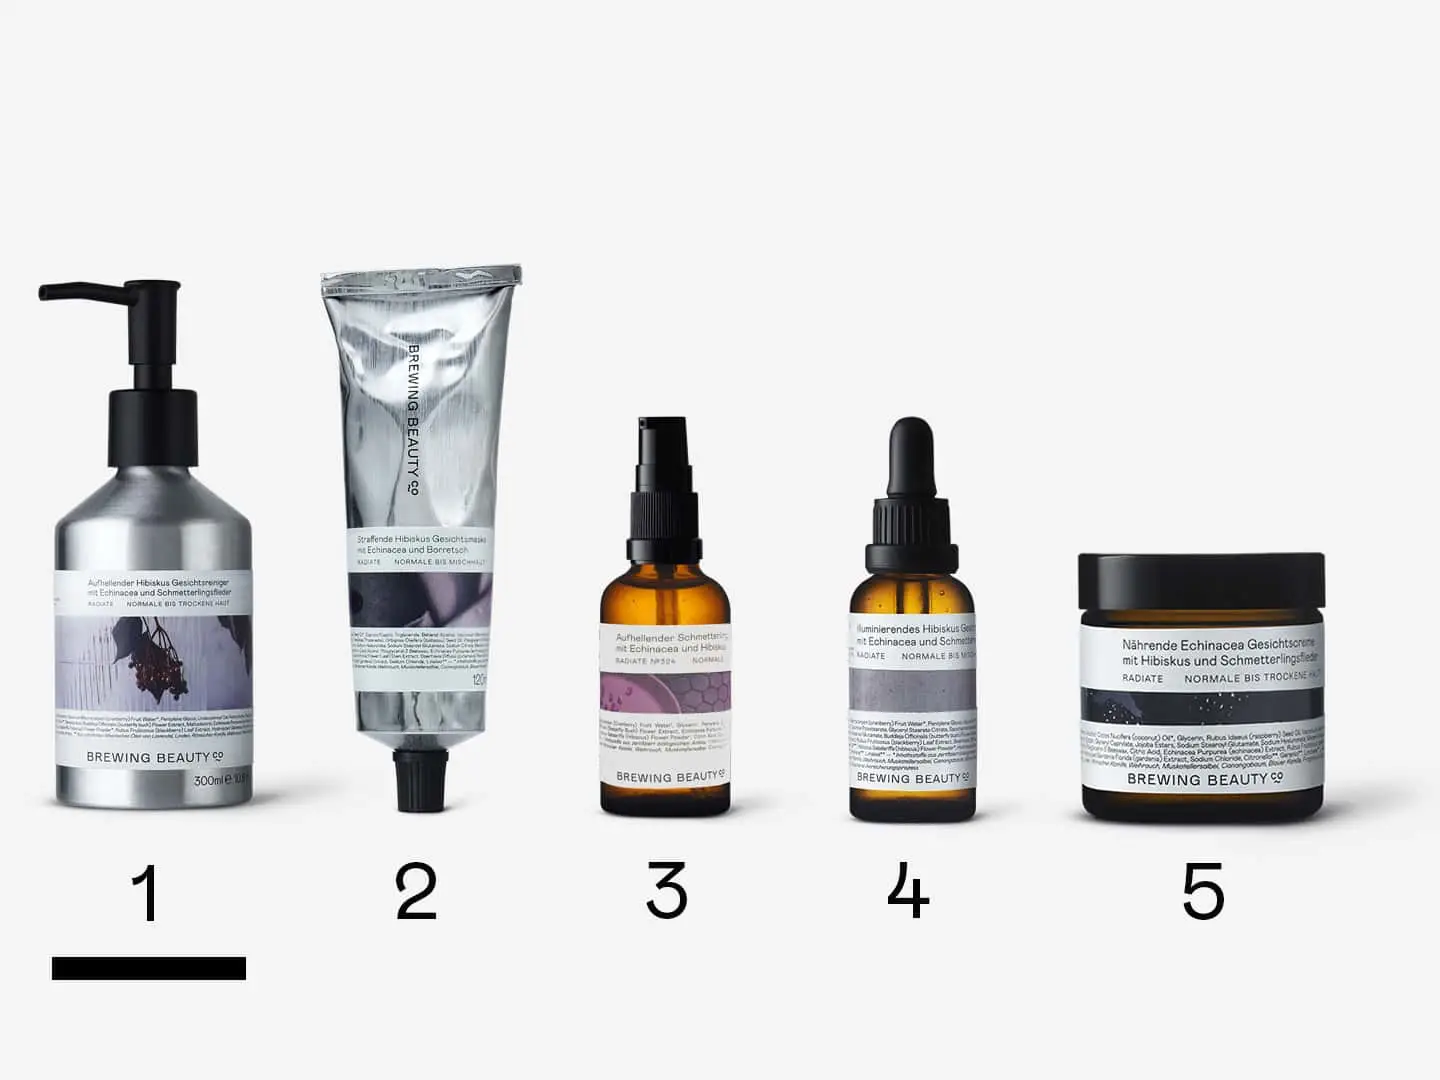 A lineup of Brewing Beauty products representing Routine No.31 